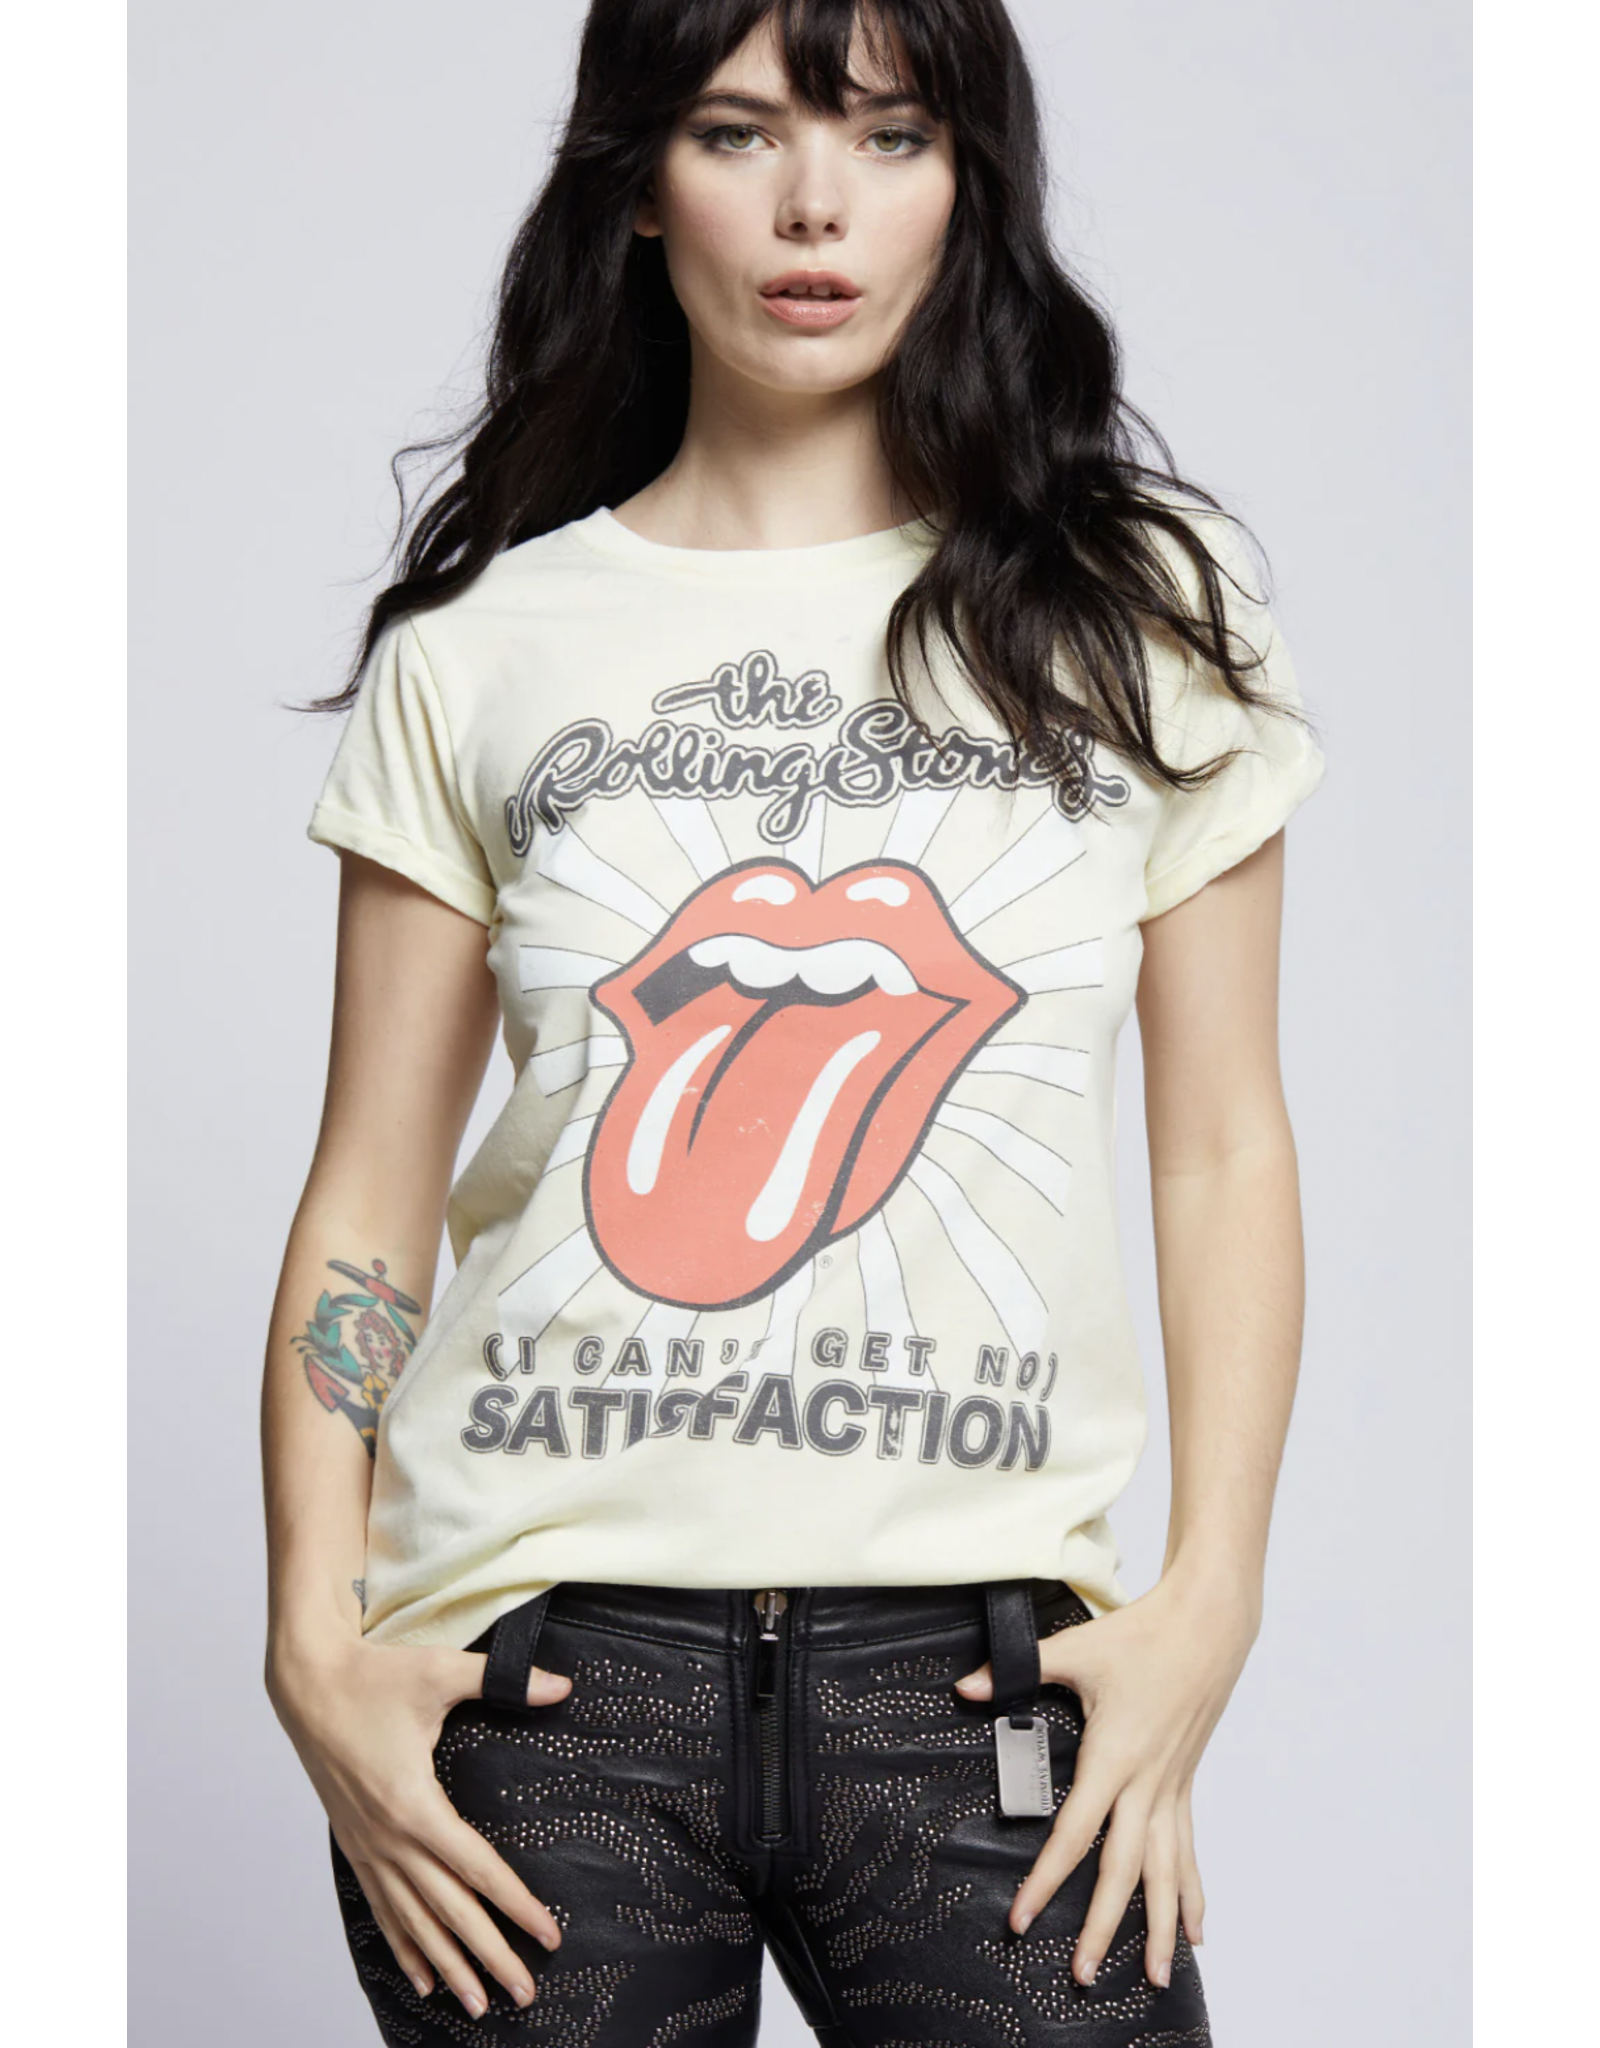 Recycled Karma Recycled Karma - The Rolling Stones Satisfaction Tee